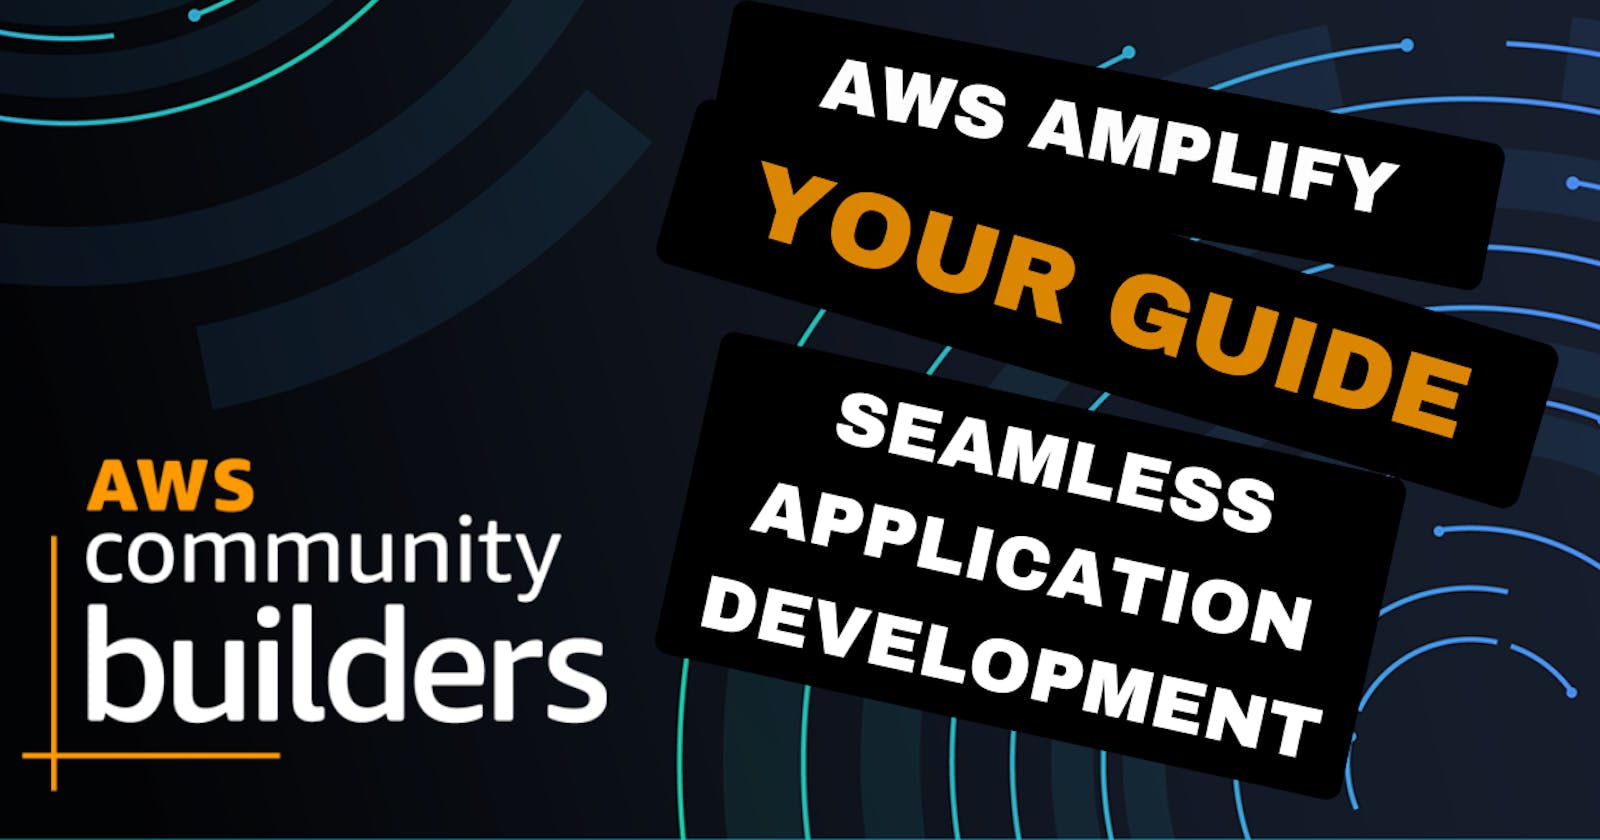 AWS Amplify: Your Guide to Seamless Application Development